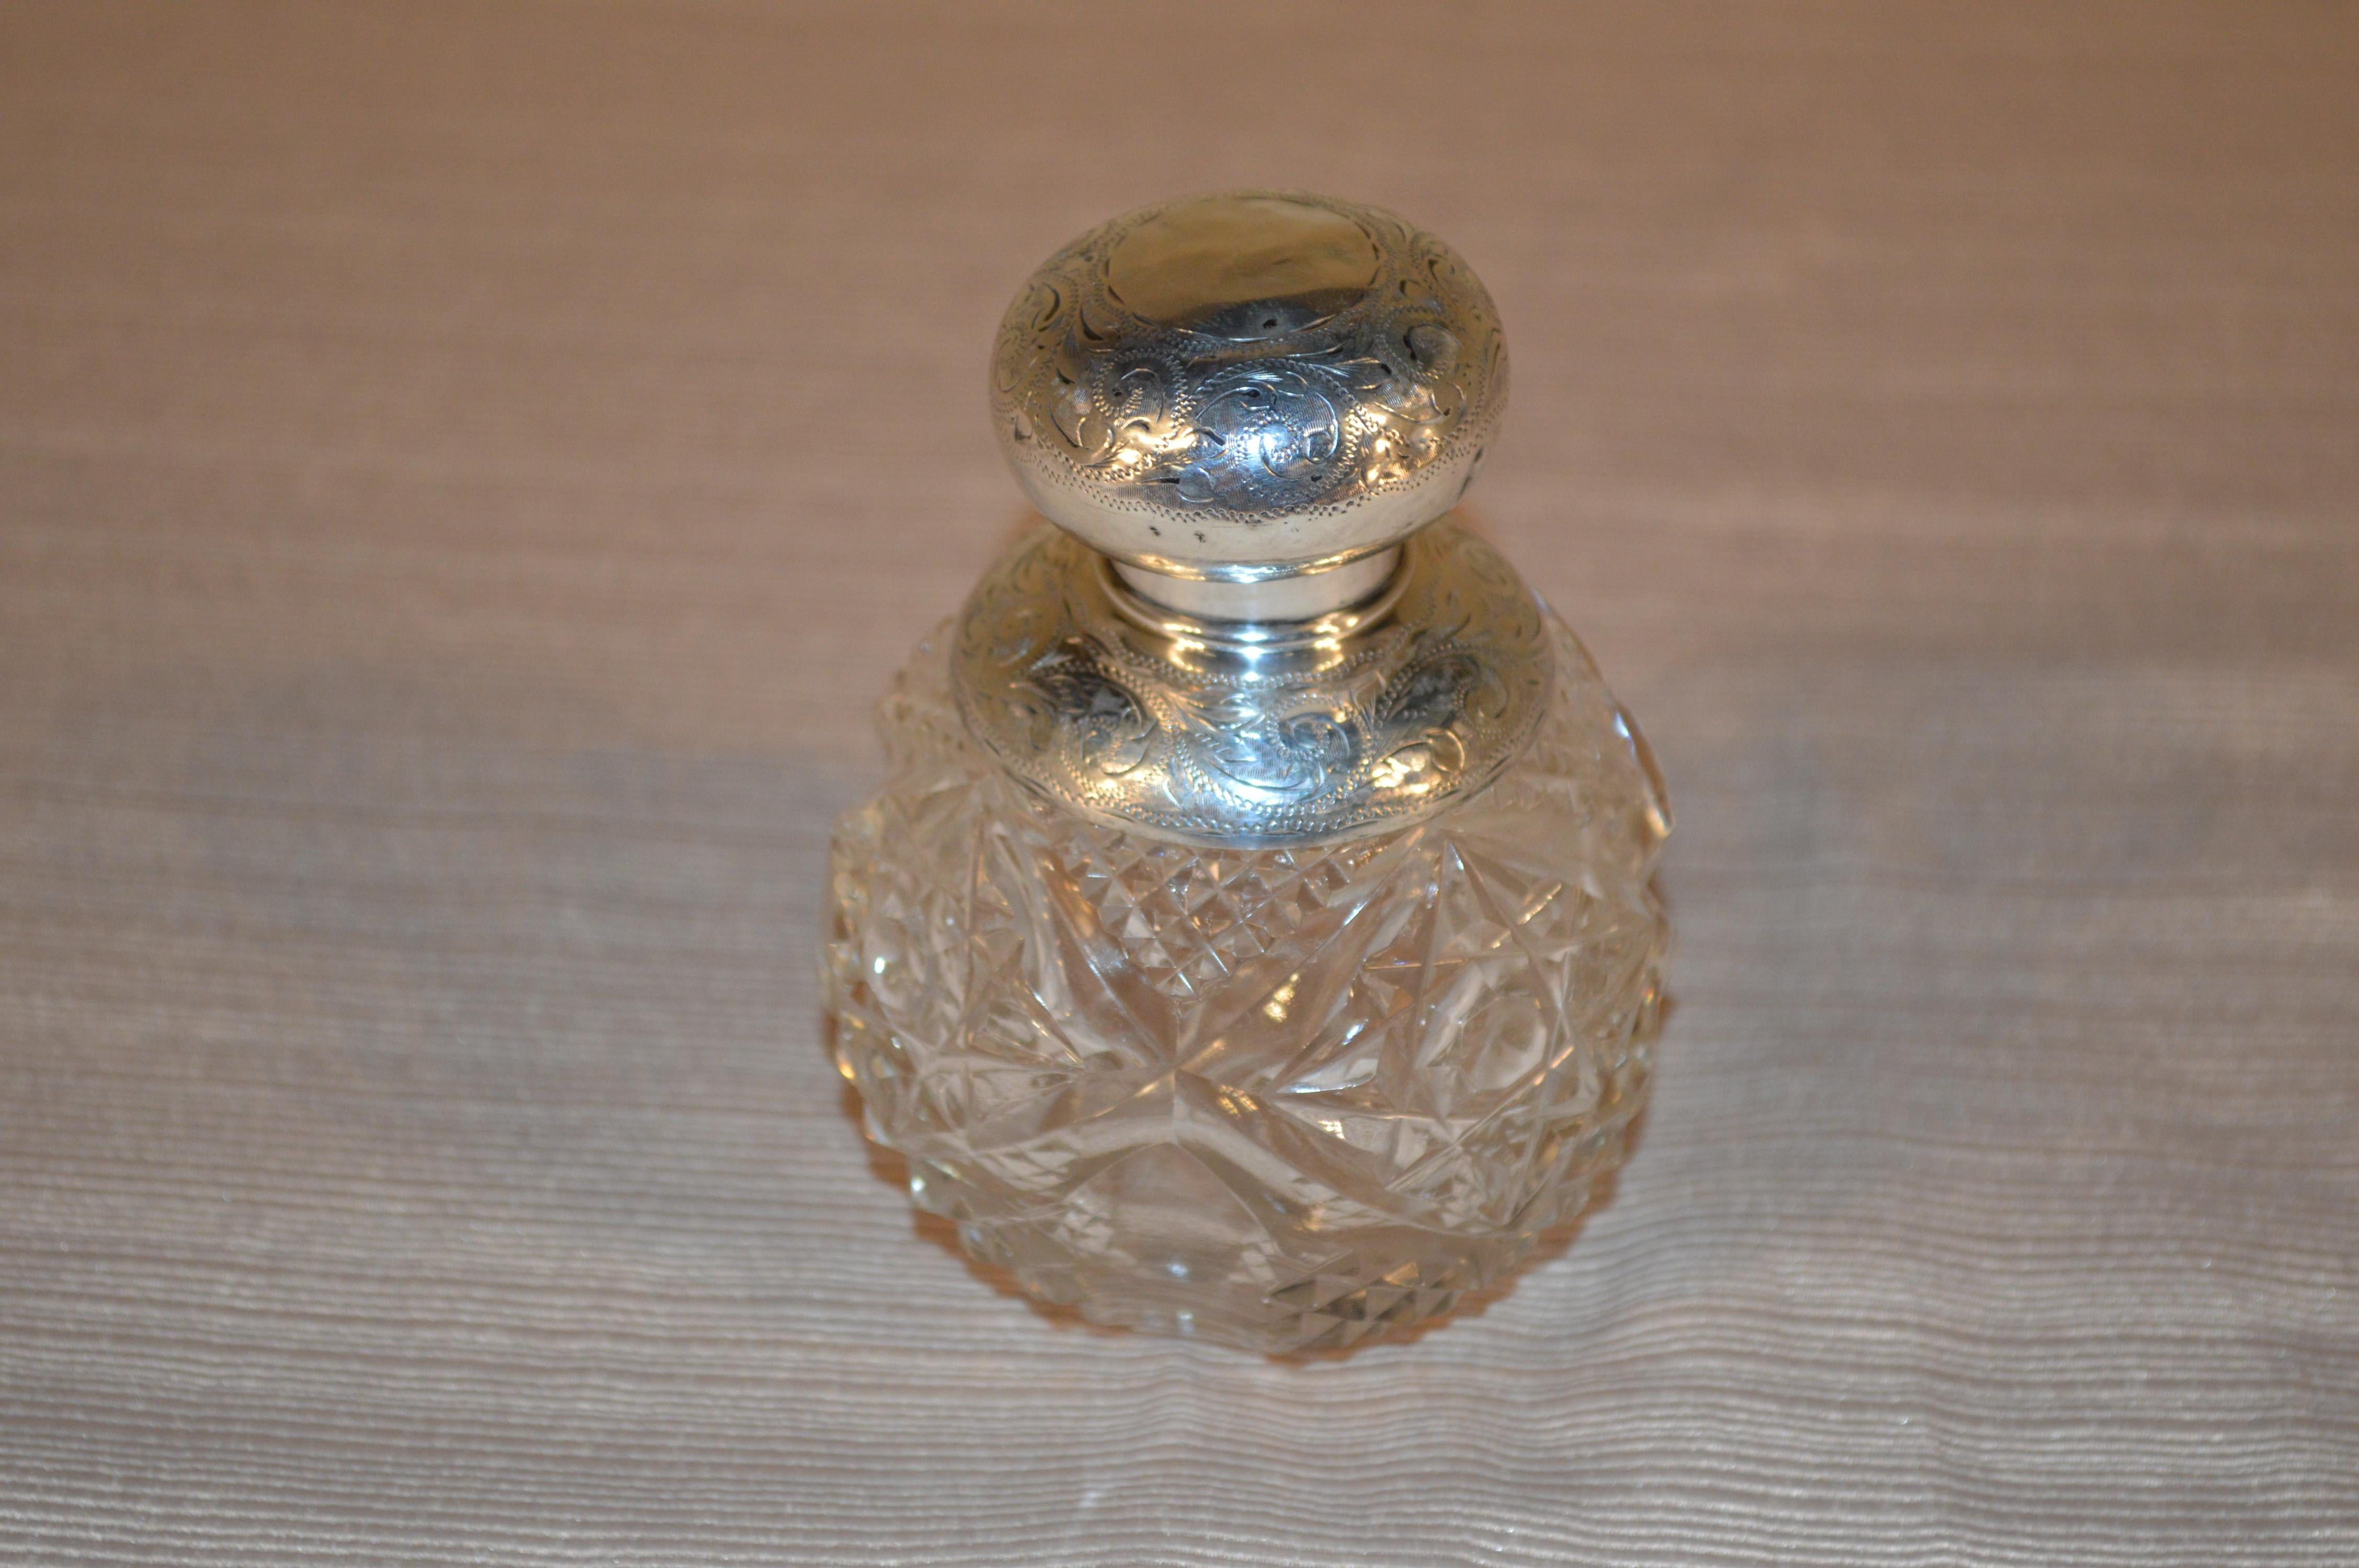 19th Century English cut crystal perfume bottle with stopper and sterling-silver top. The sterling collar is hallmarked but is worn to the point of being unidentifiable.